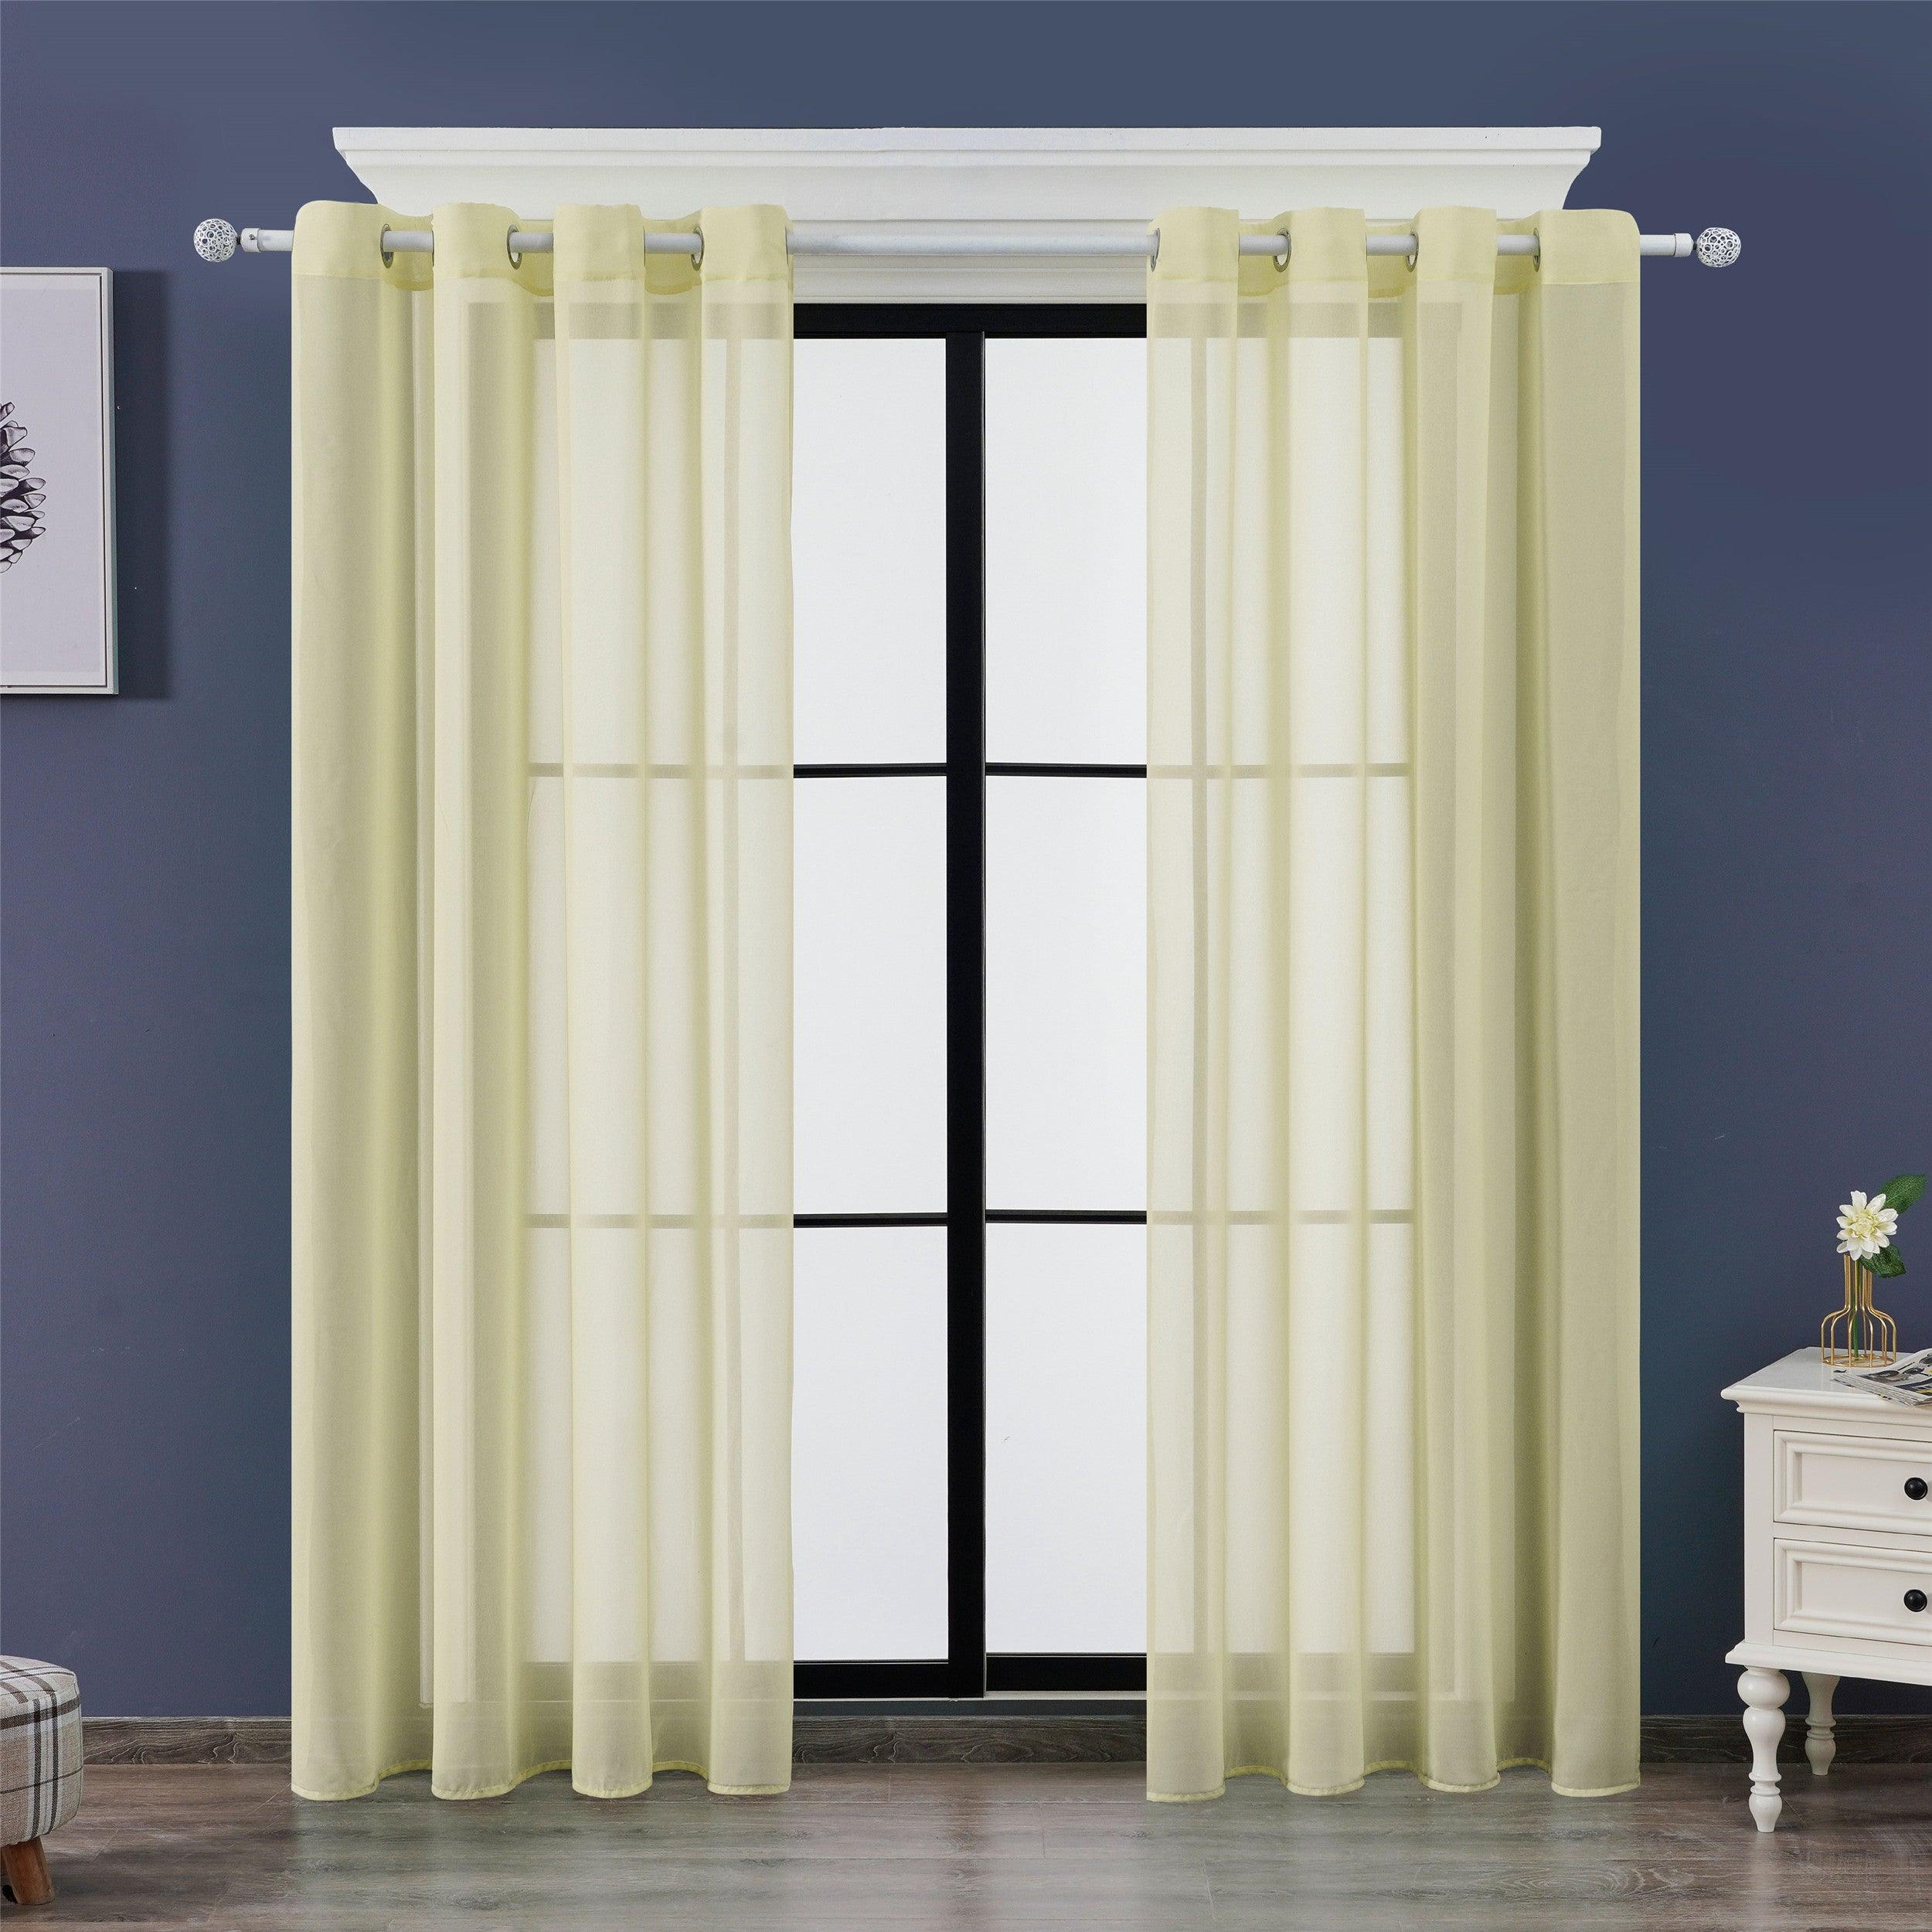 Topfinel Chiffon White Sheer Curtains for Bedroom and Living Room, Soft Solid Grommet Window Curtains - Topfinel